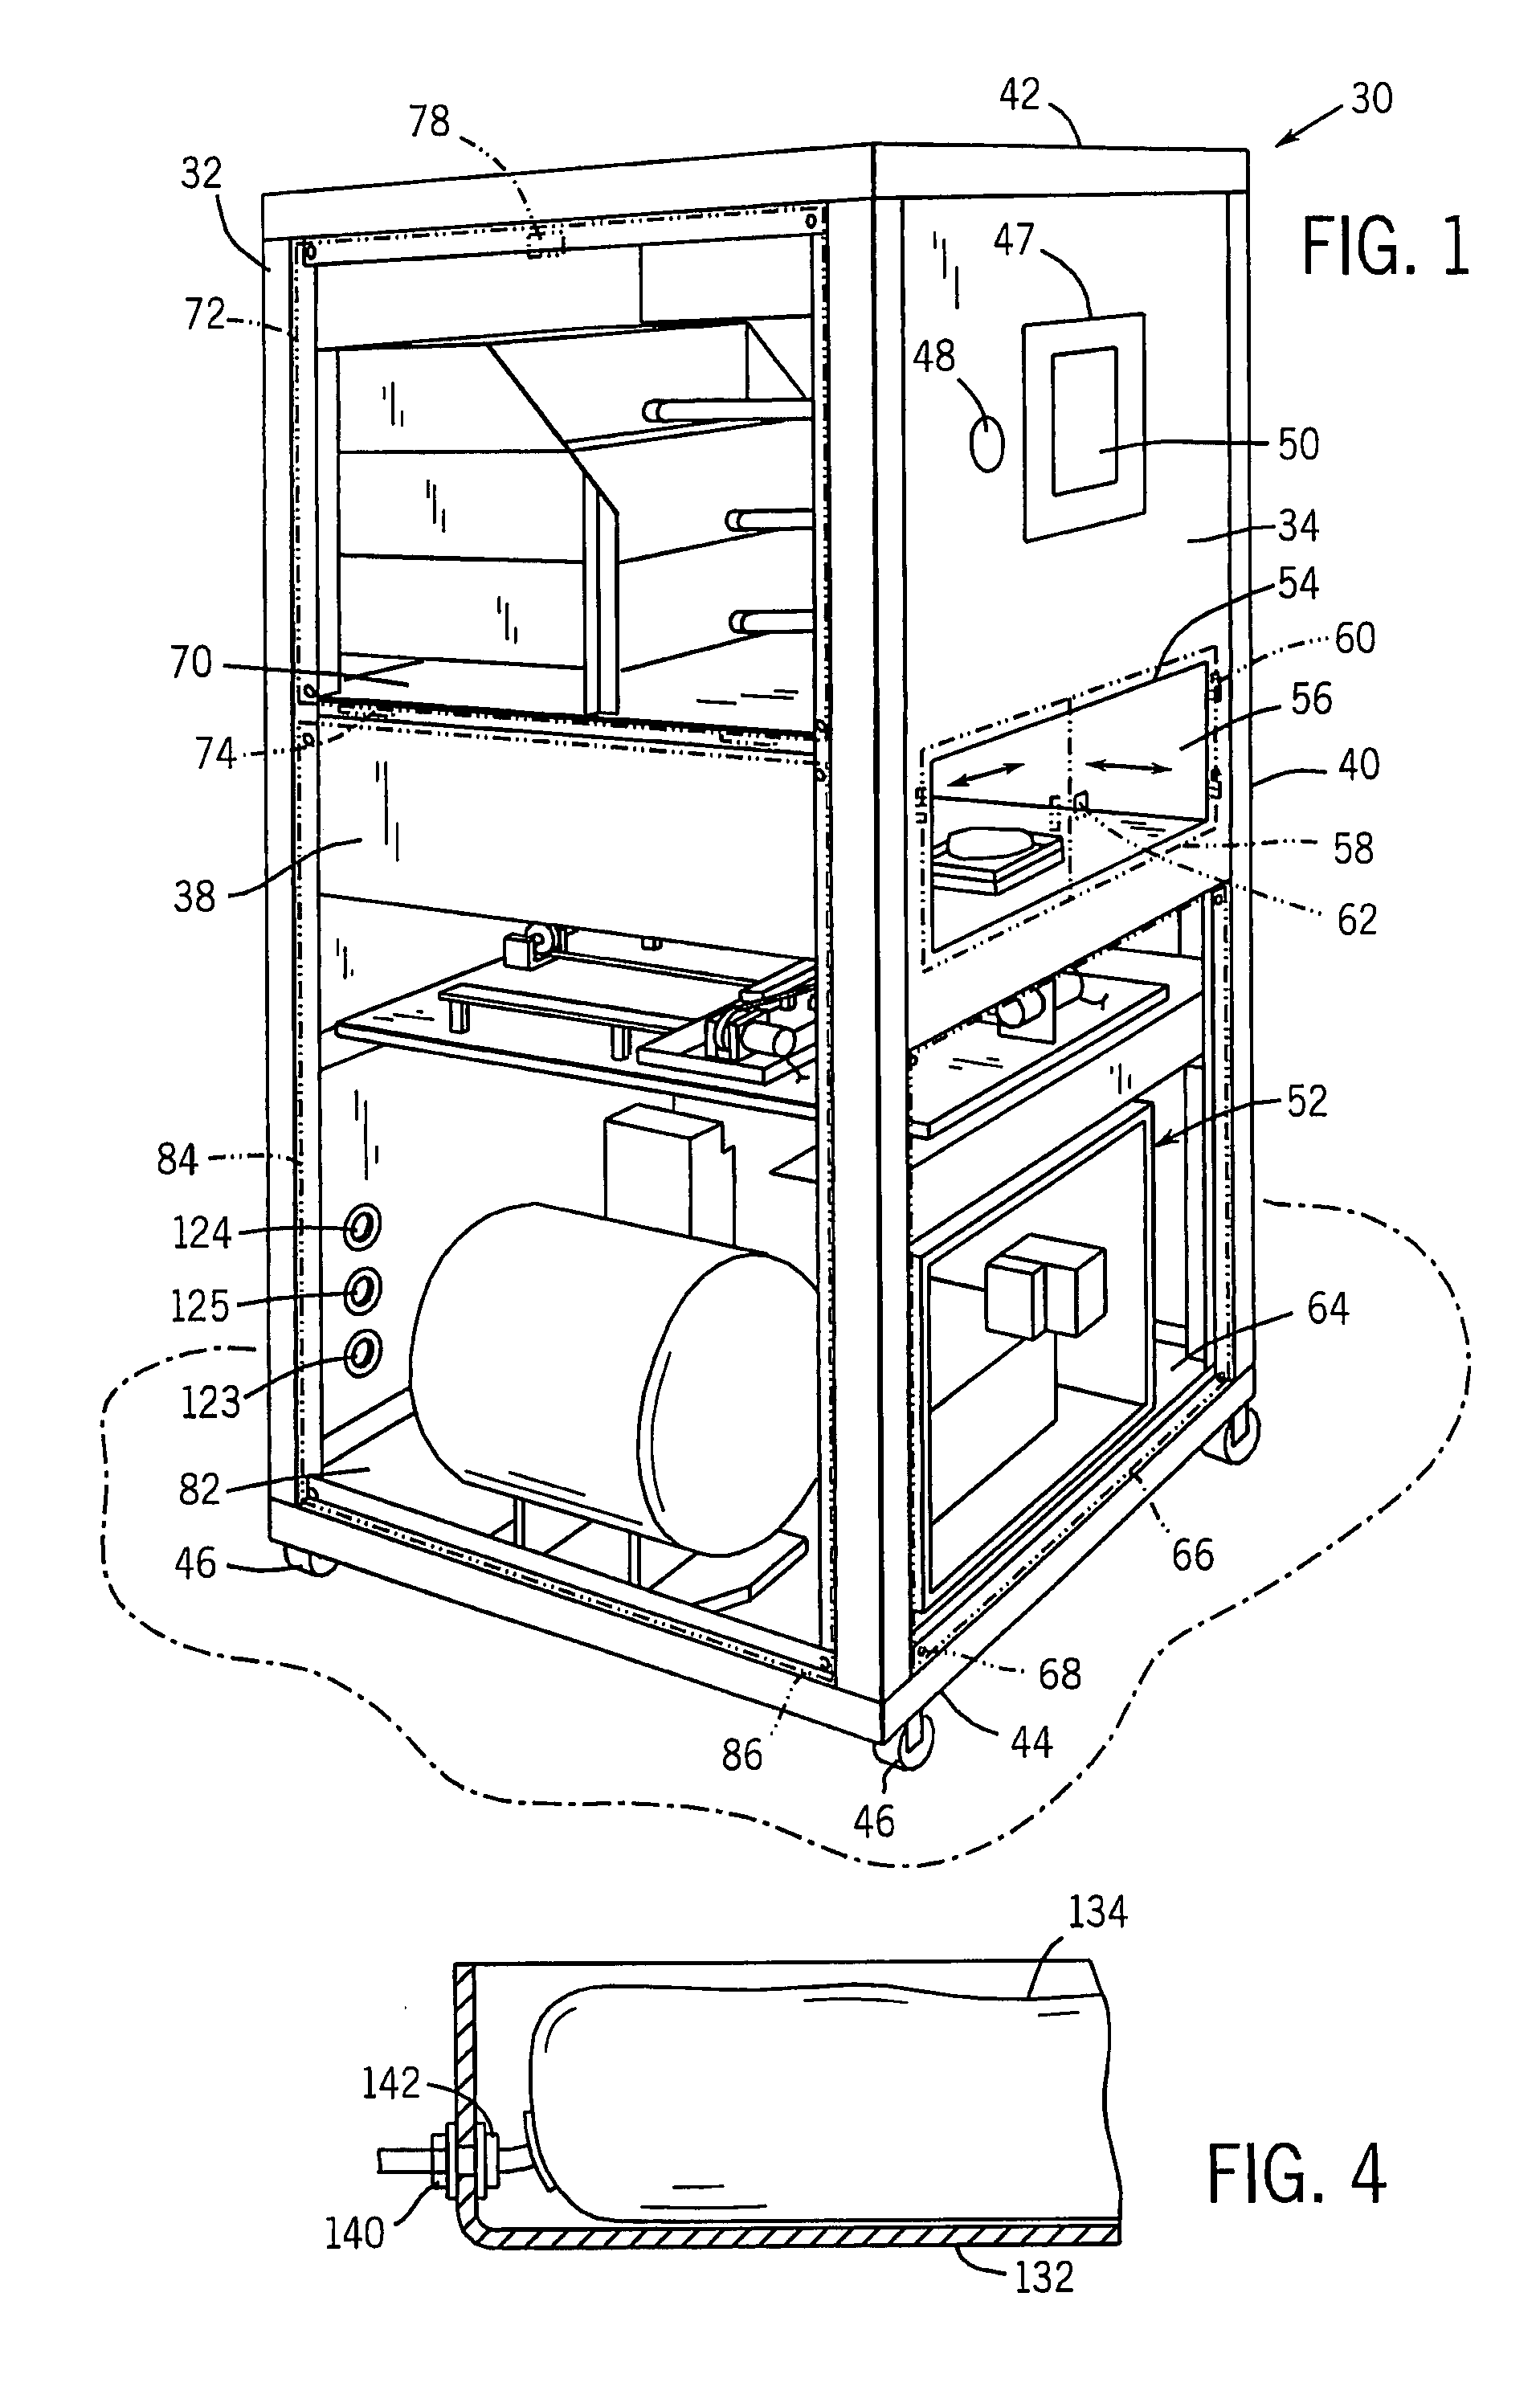 Needleless injection device and method of injecting